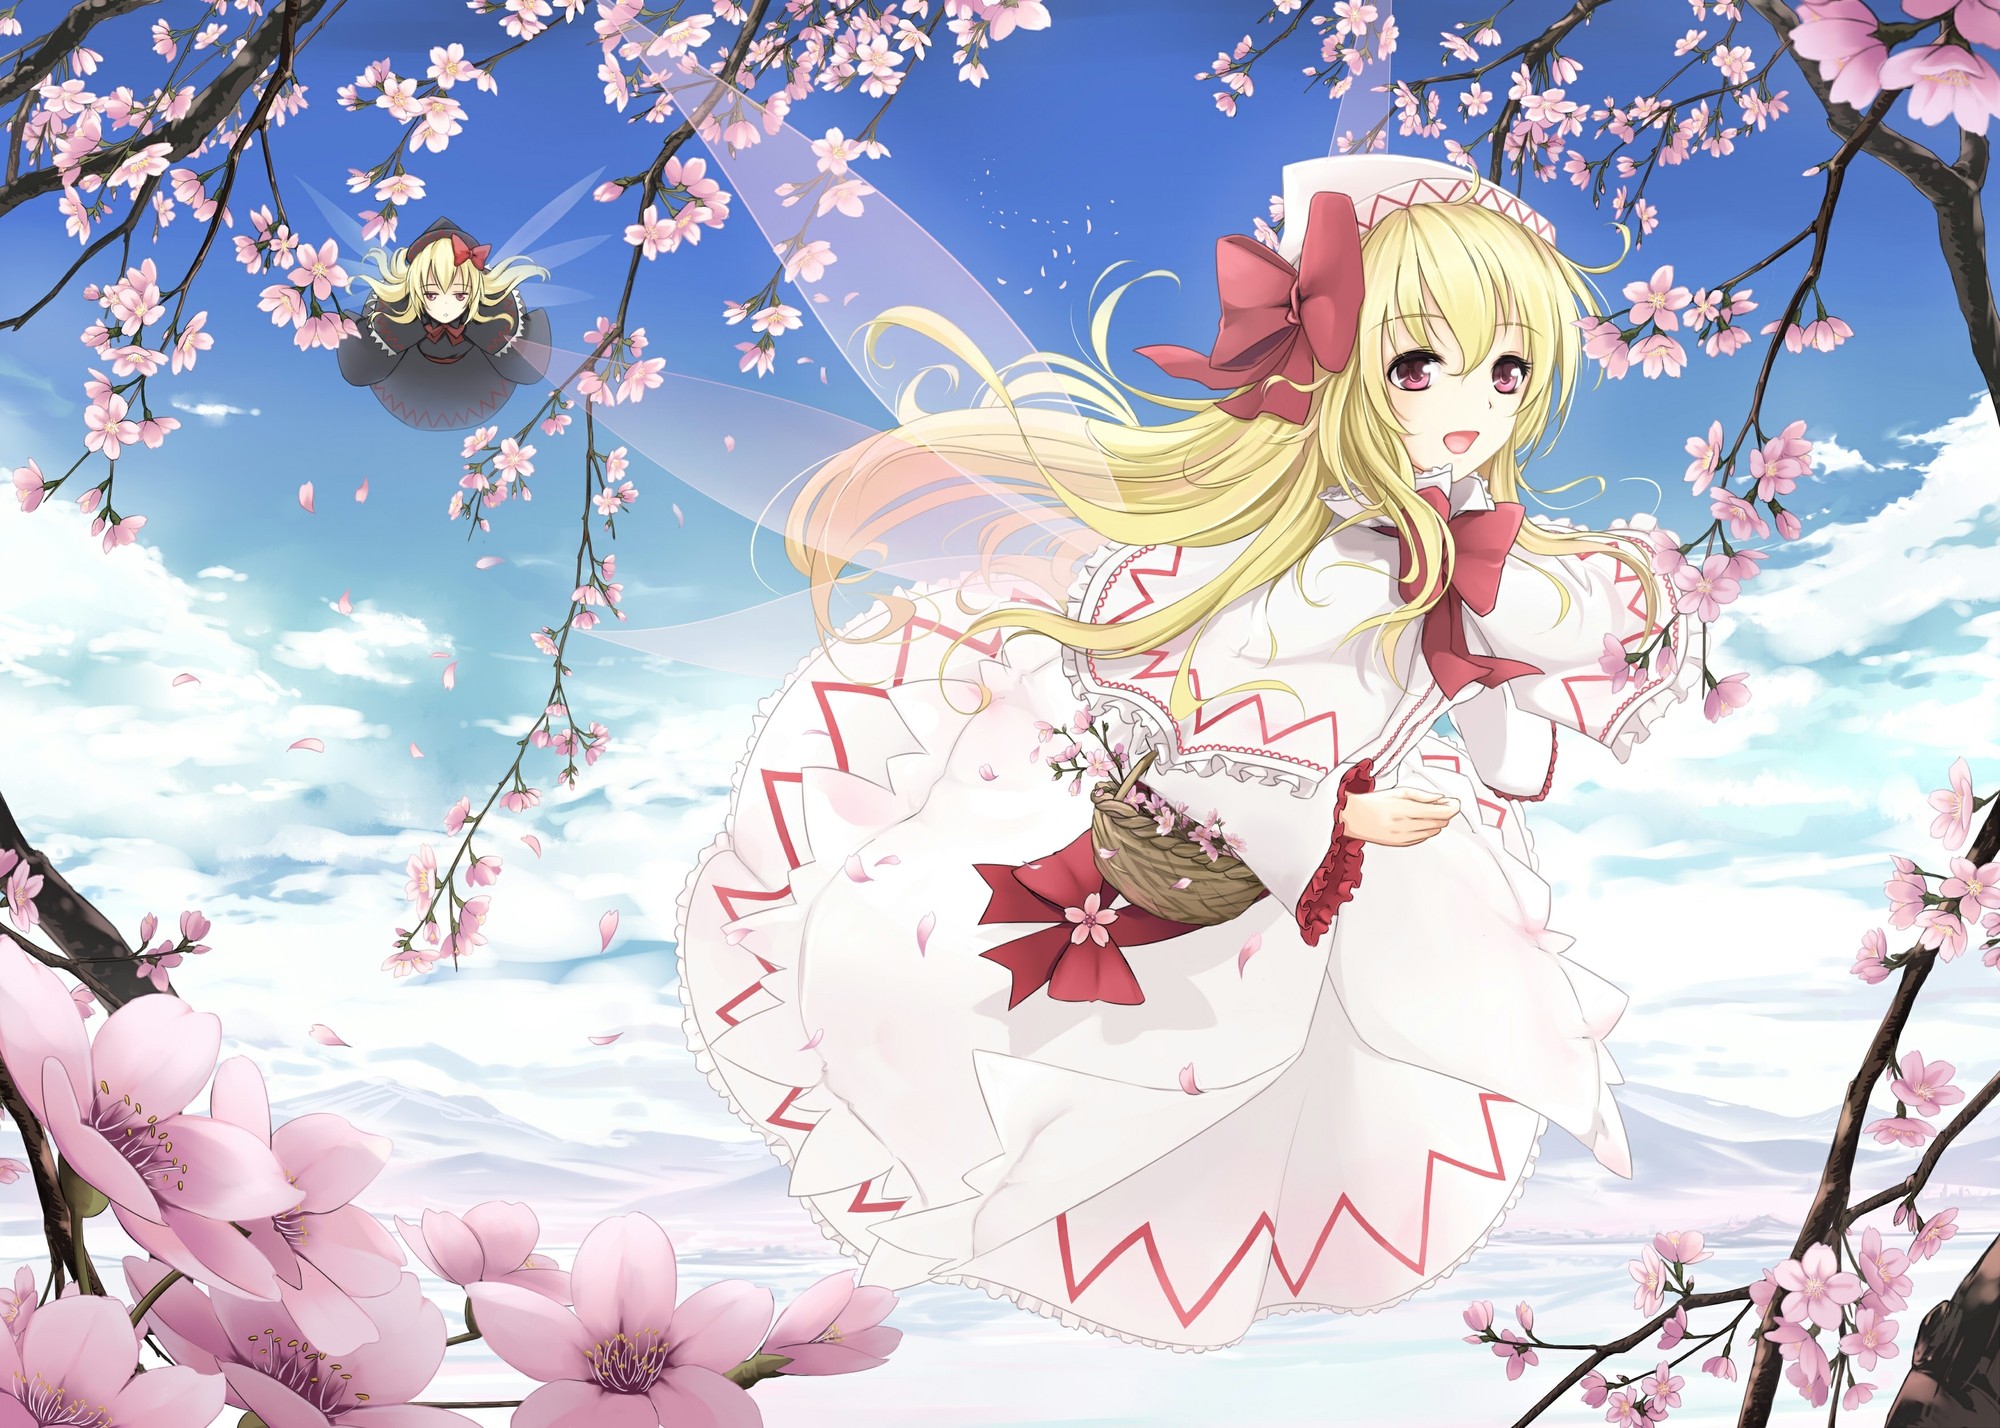 blondes, Video, Games, Clouds, Touhou, Wings, Cherry, Blossoms, Dress, Flying, Long, Hair, Spring, Fairies, Blossoms, Red, Eyes, Bows, Black, Dress, Open, Mouth, Baskets, Flower, Petals, Lily, White, White, Dres Wallpaper